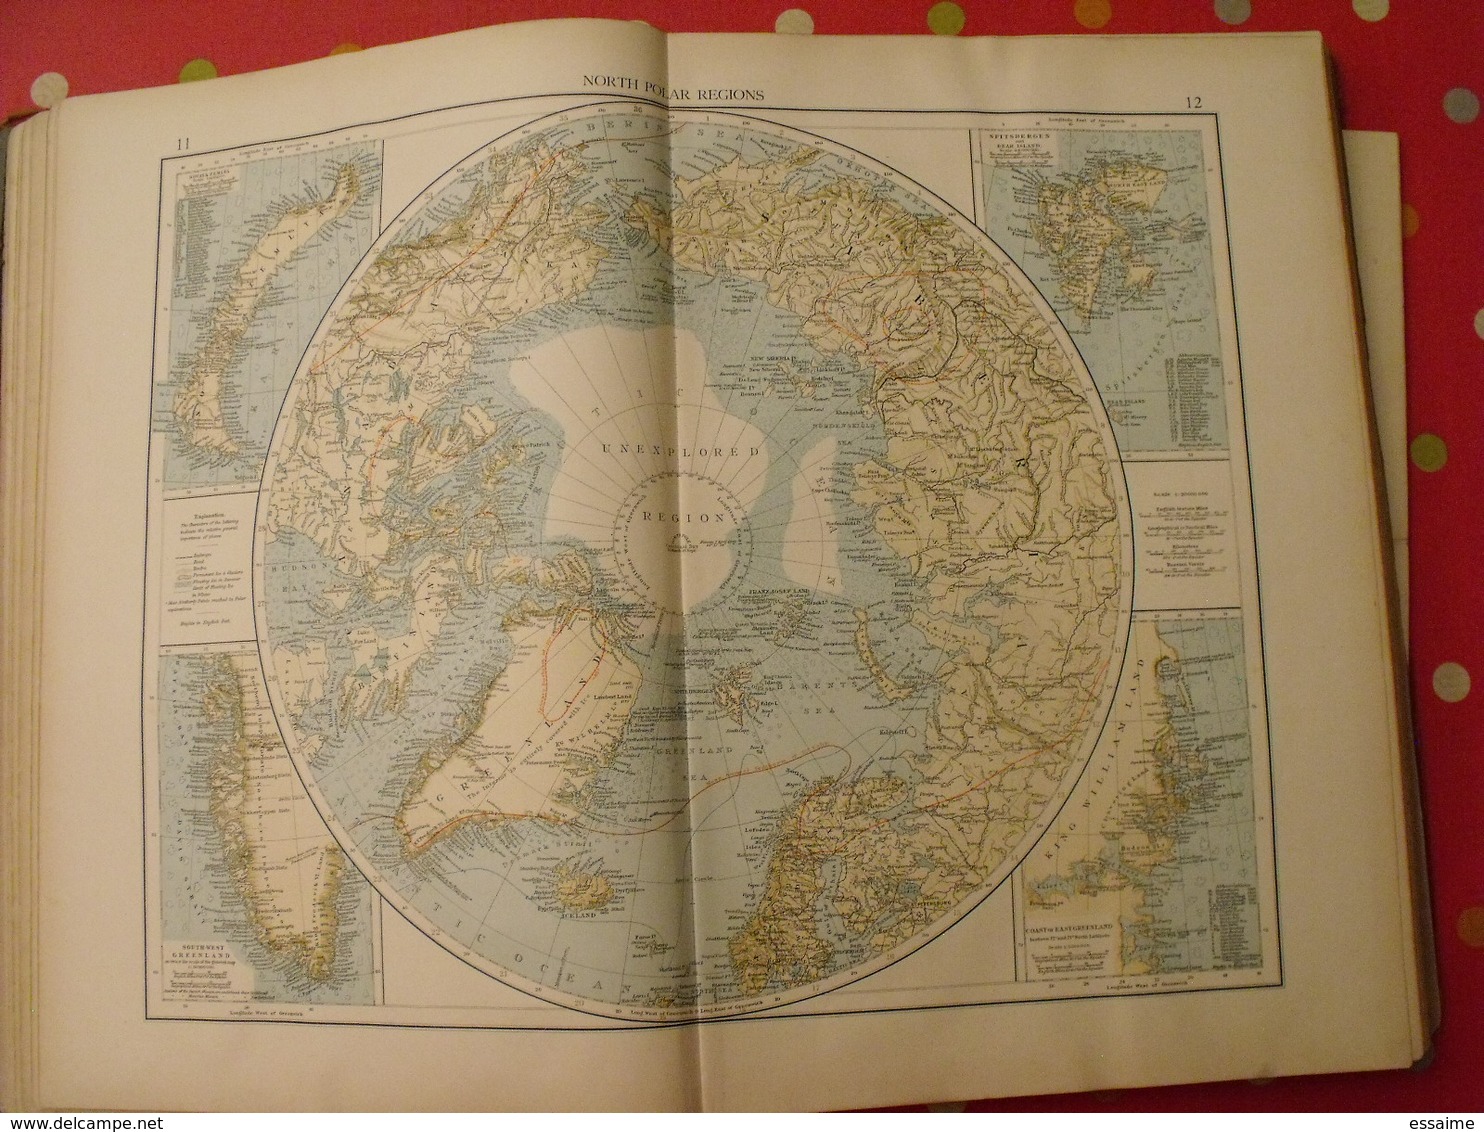 "the Times" Atlas published at the office of "the Times" 1900. 132 pages of Maps (196 Maps) + alphabetical index